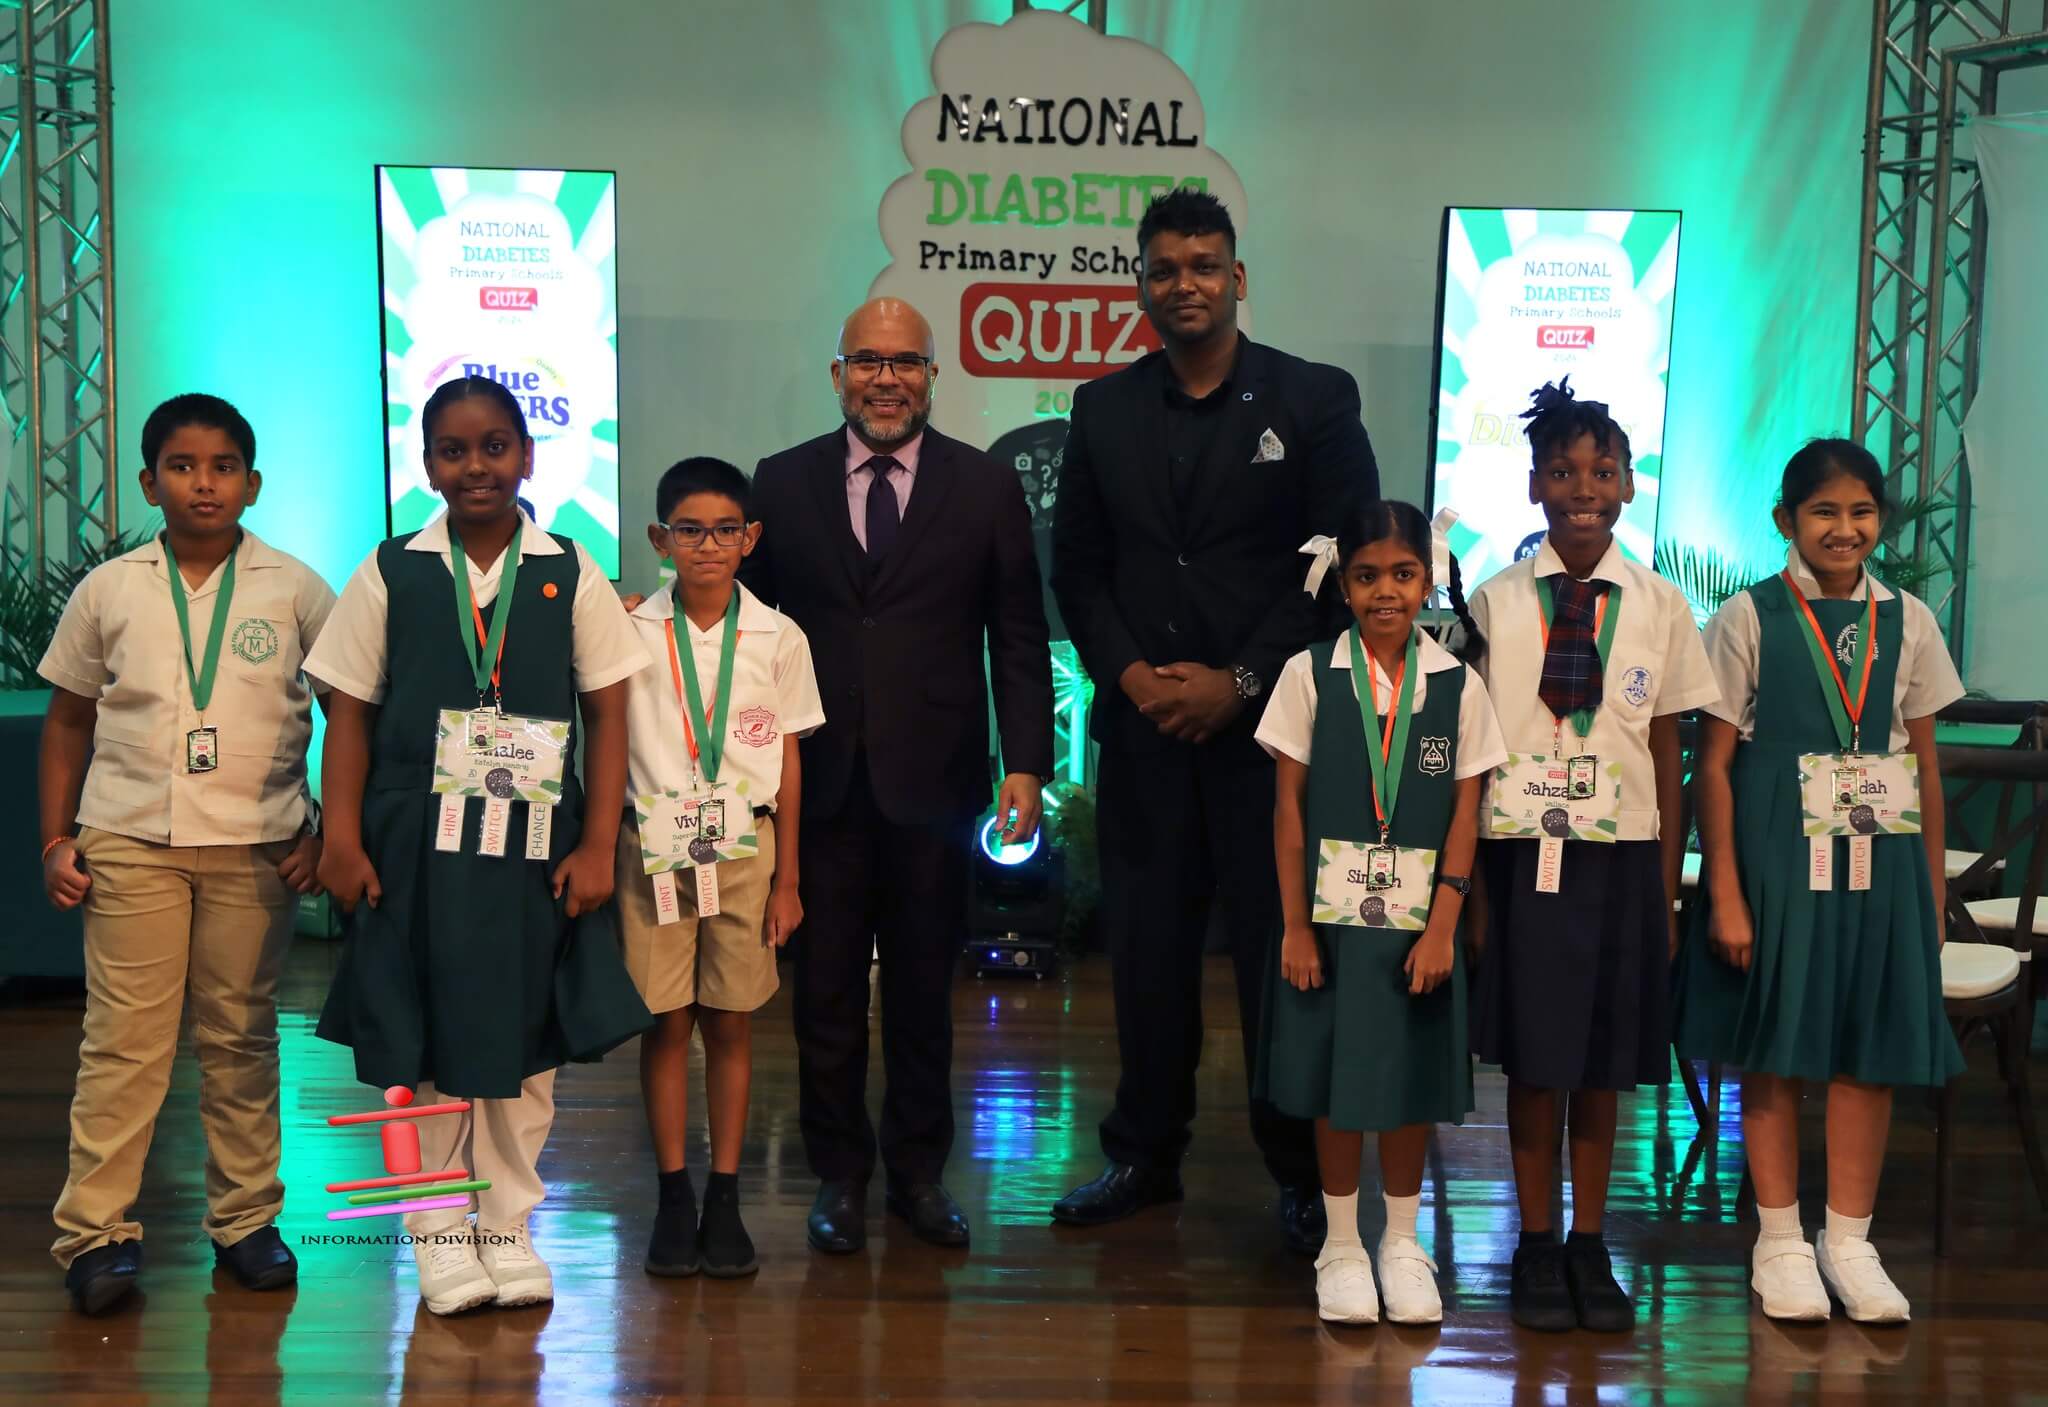 His Excellency attends the finals of the National Diabetes Primary School Quiz